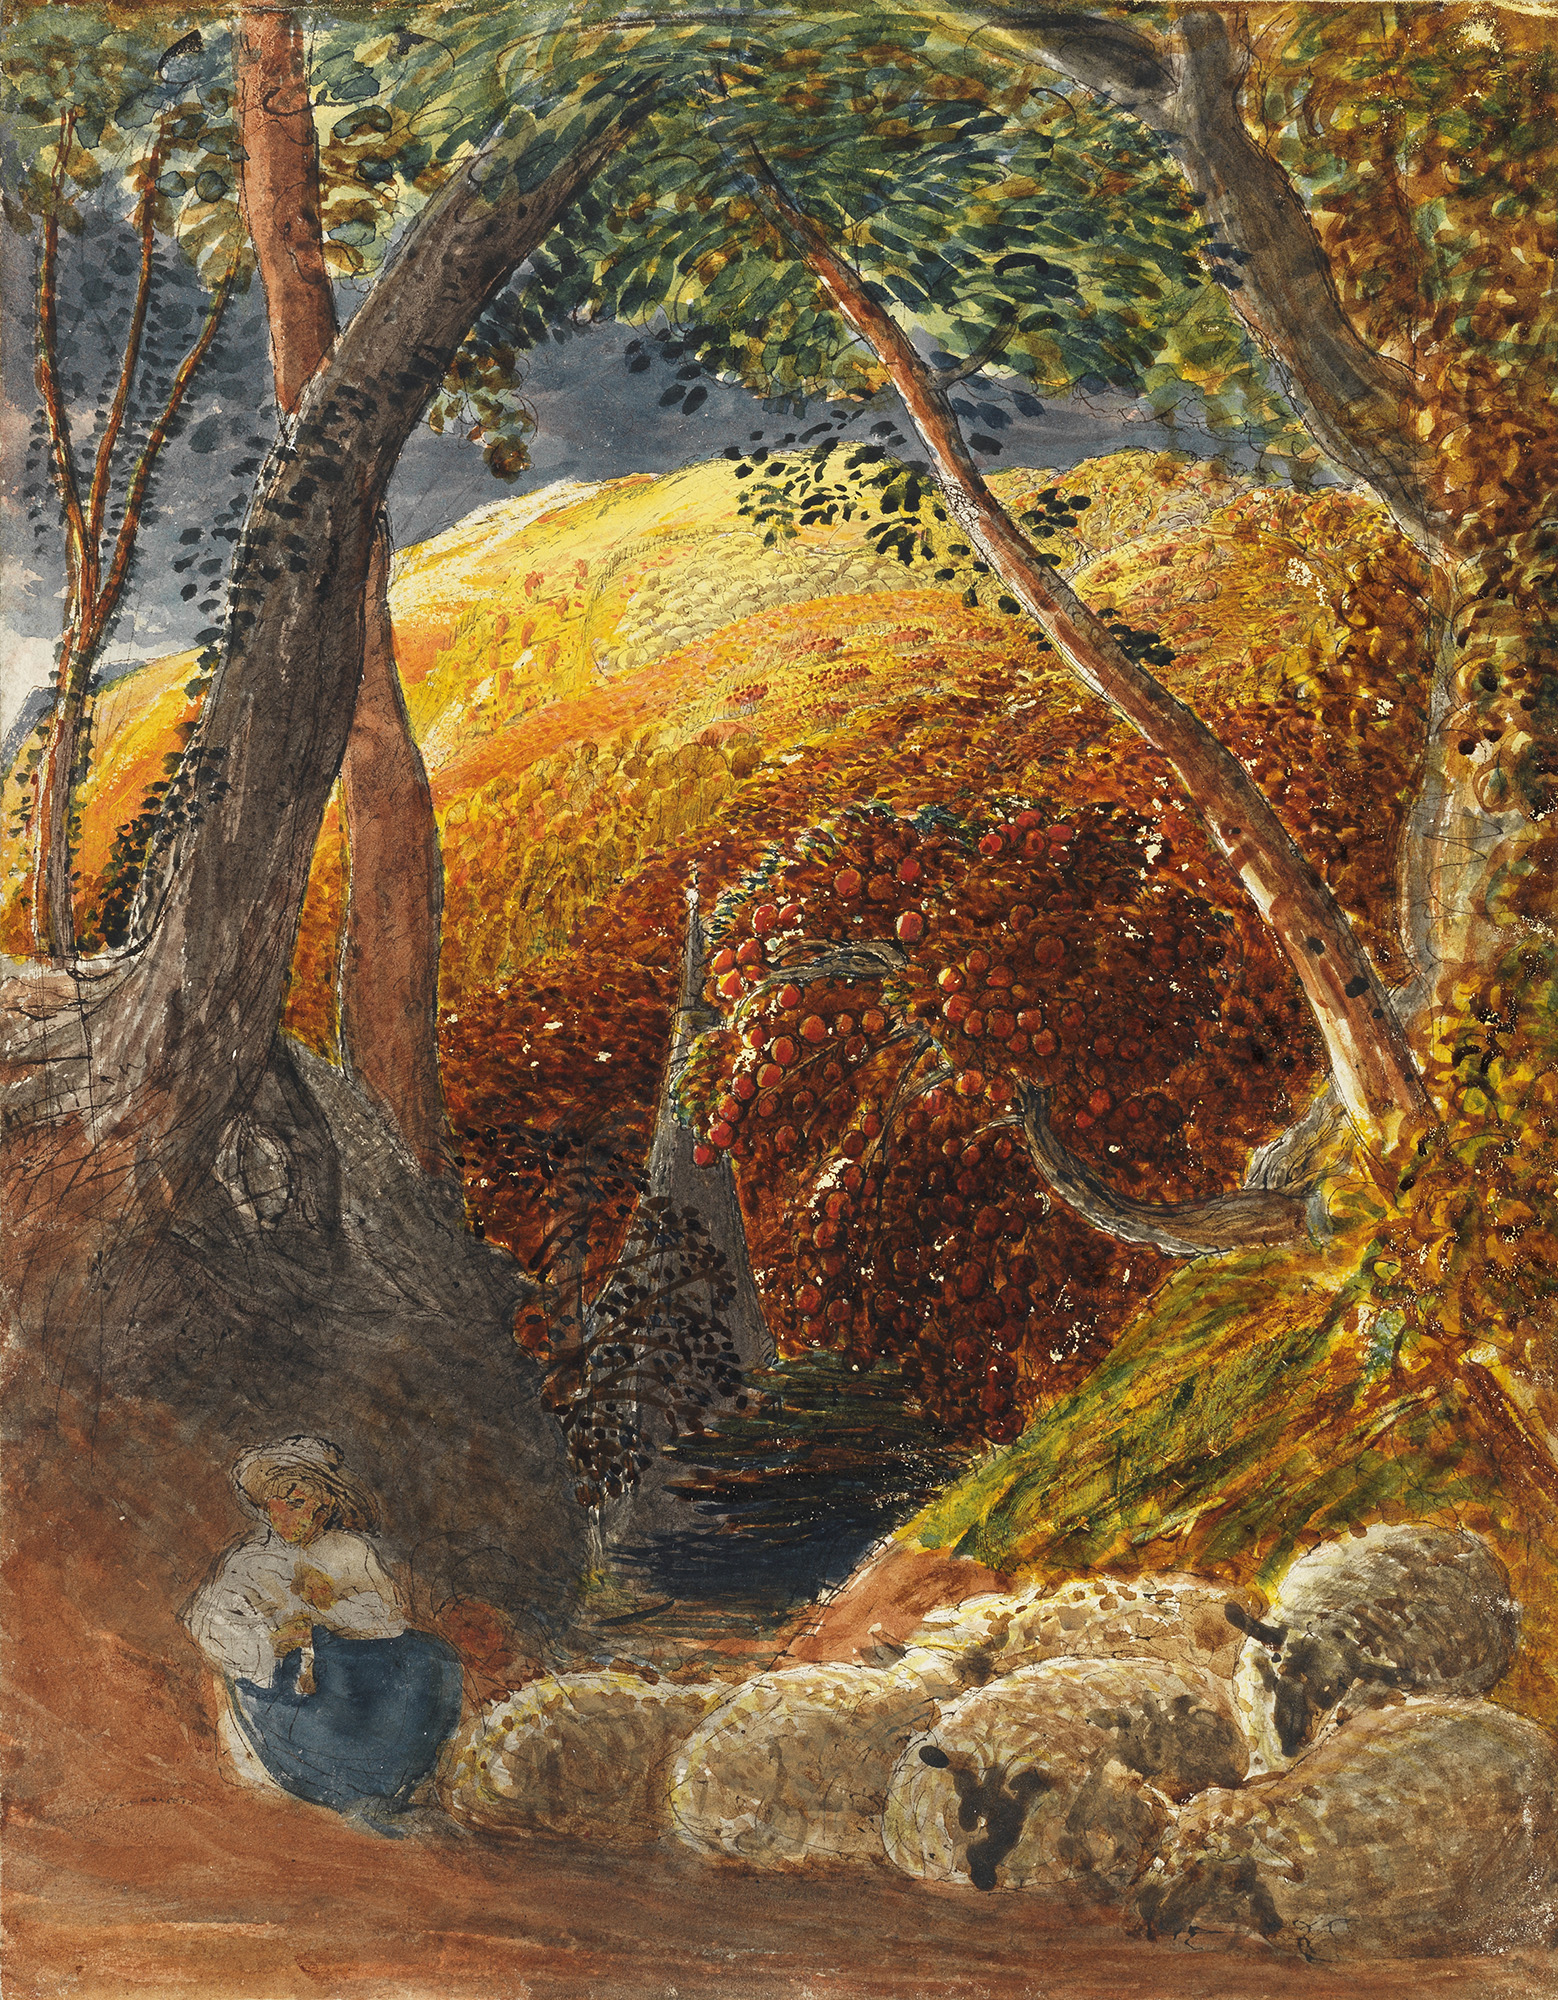 Colourful painting of abstract apple tree with person and sheep underneath